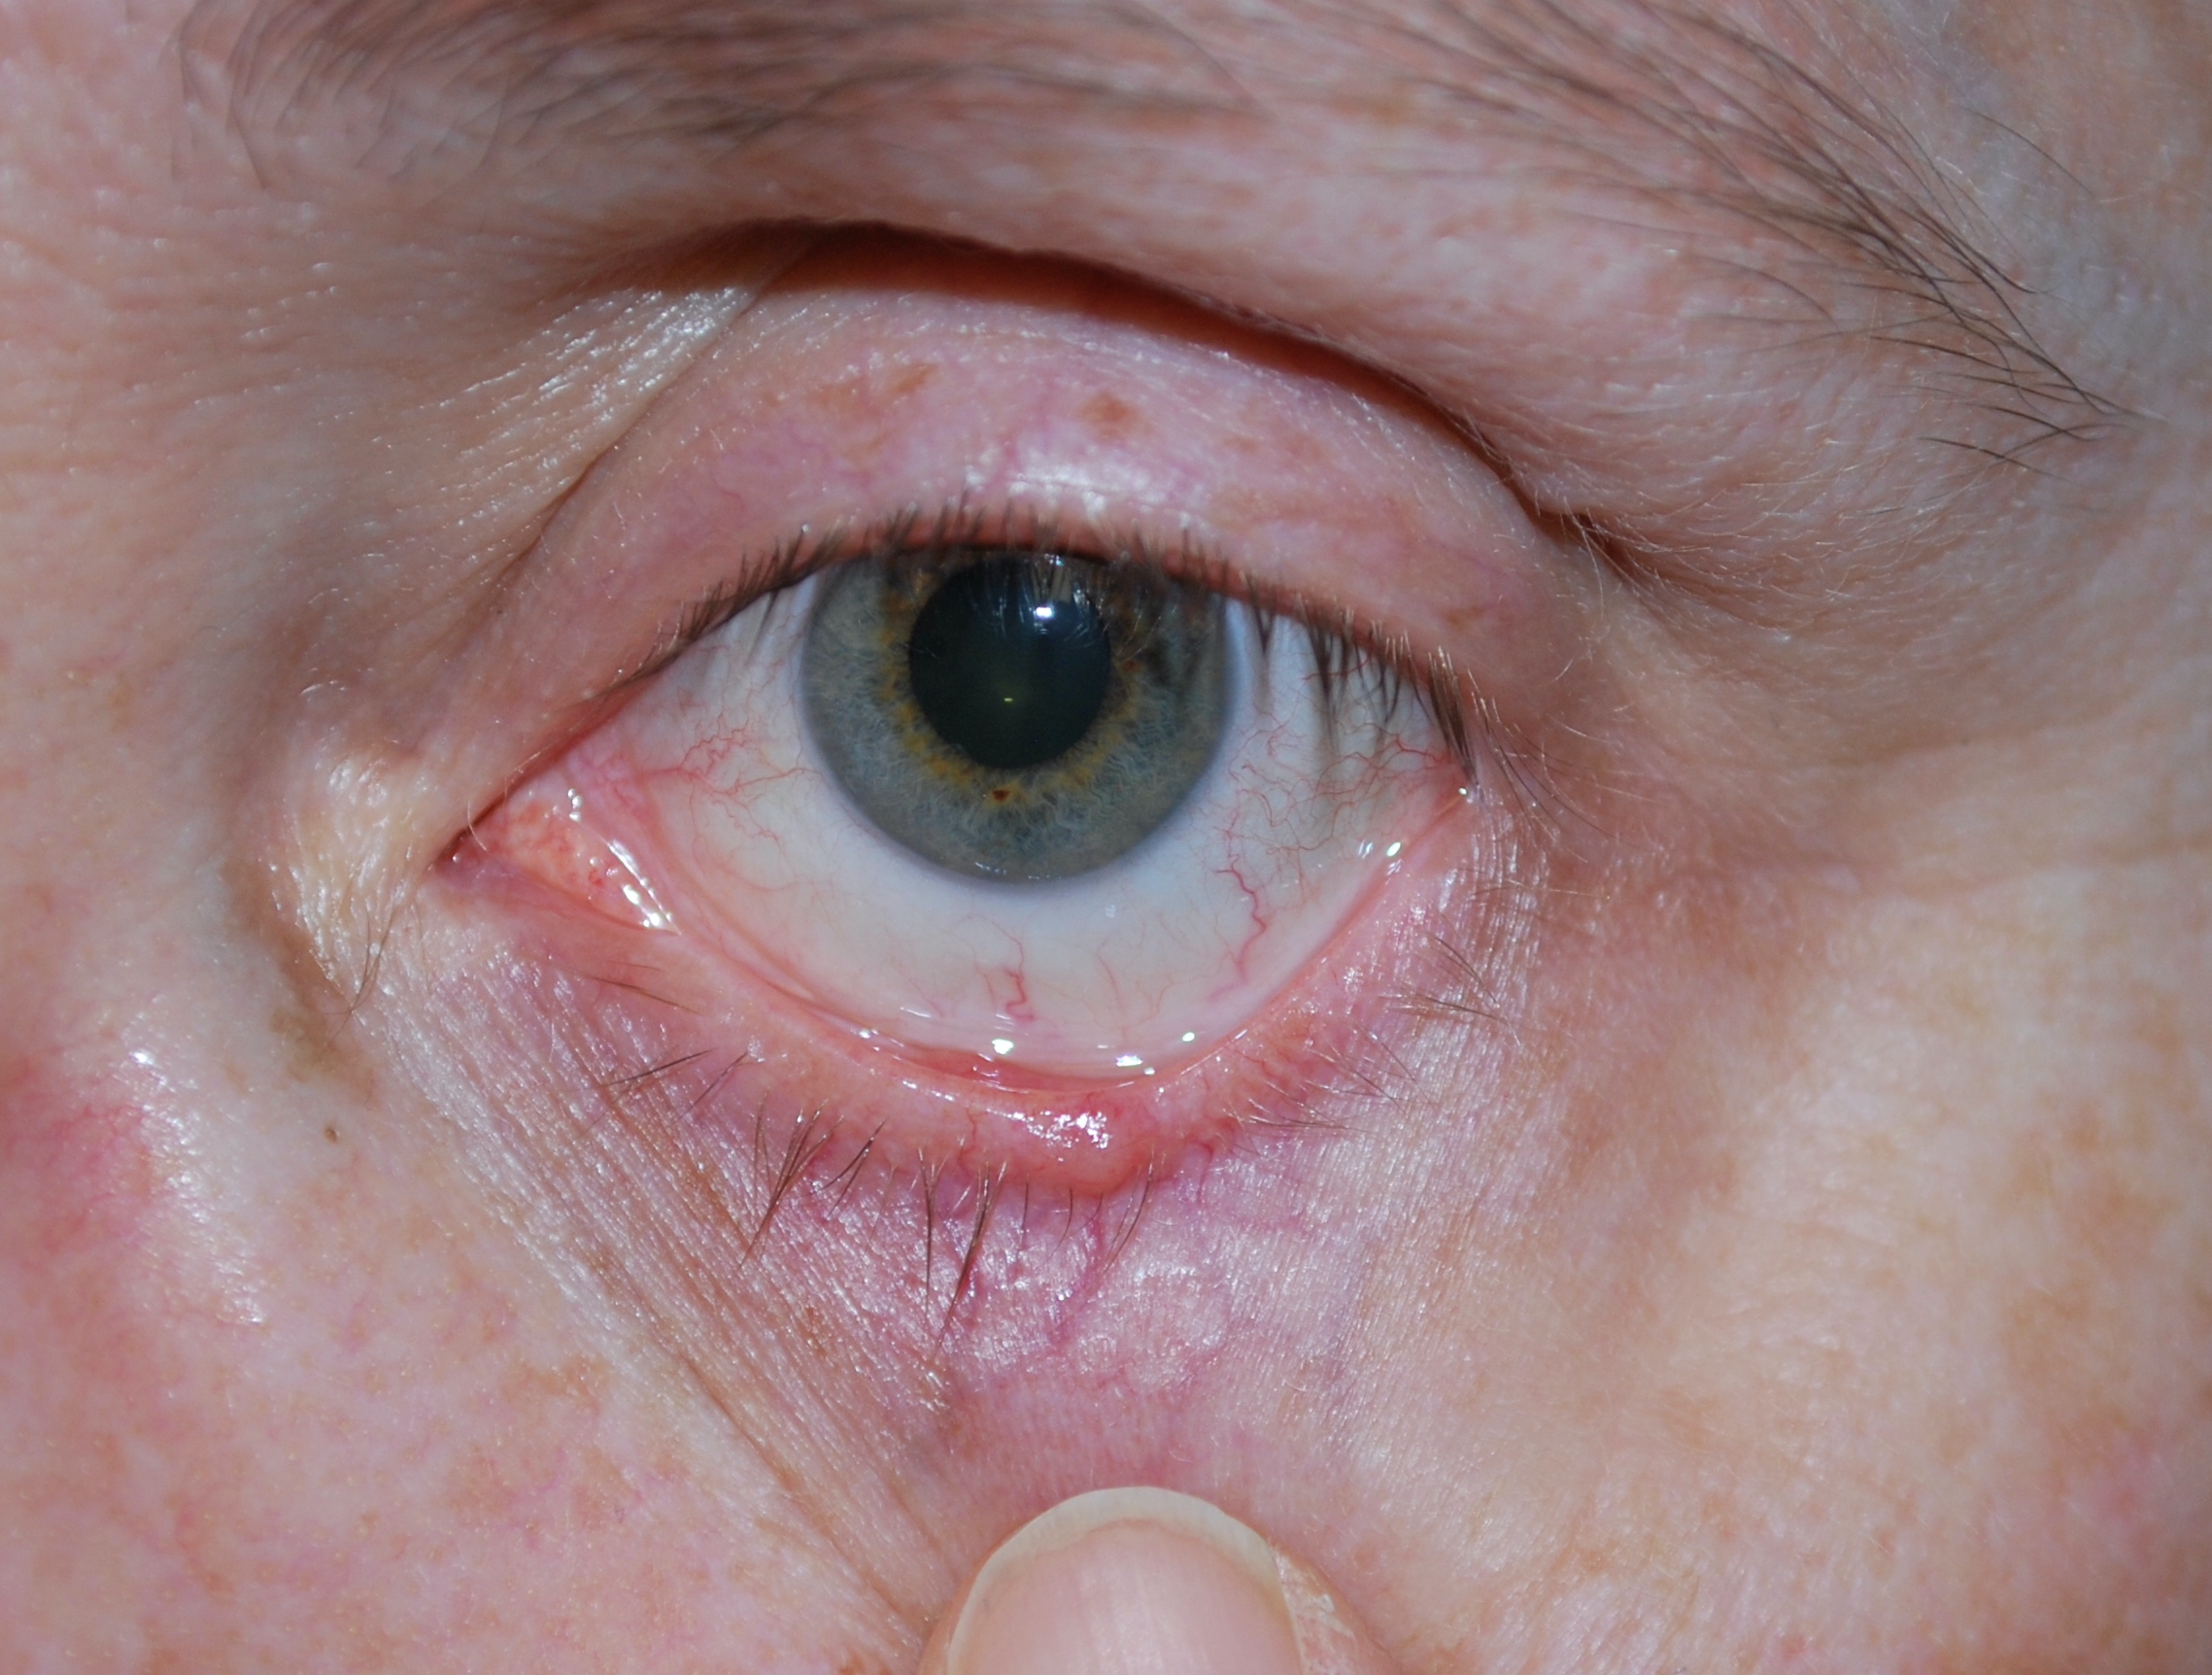 Basal Cell Carcinoma of the left lower eyelid